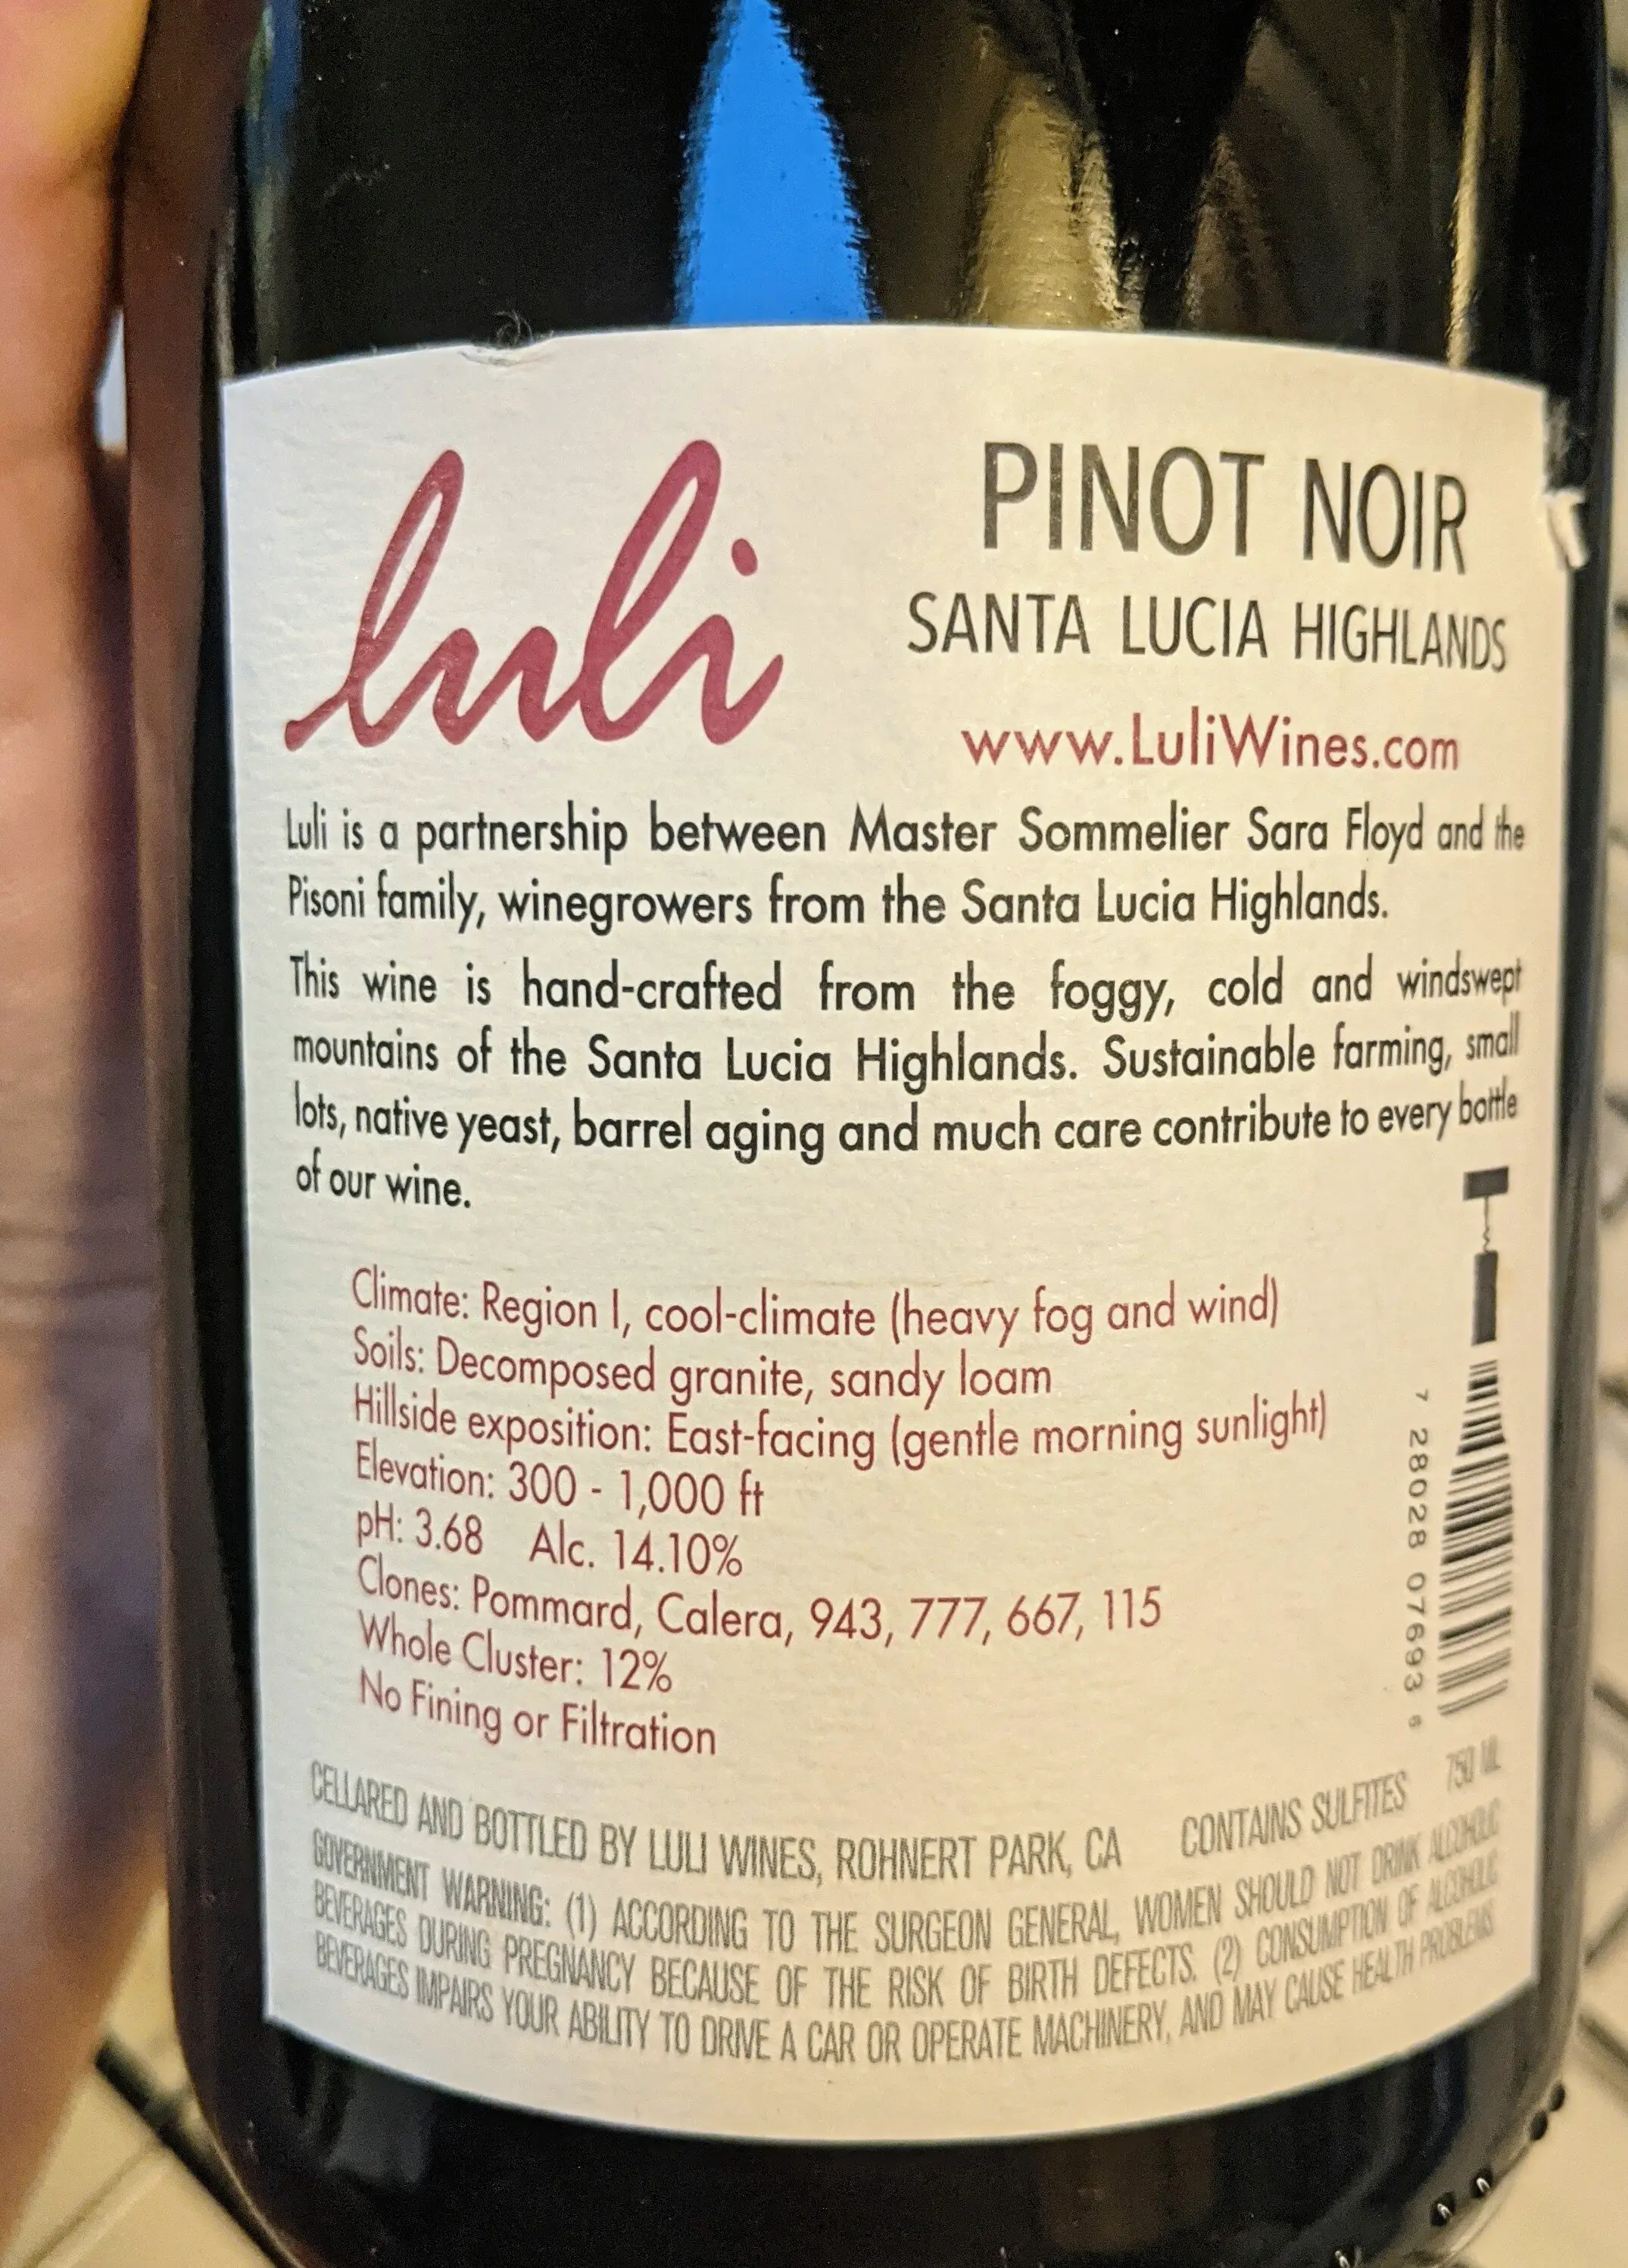 how to read a wine label - sulfites, luli pinot noir